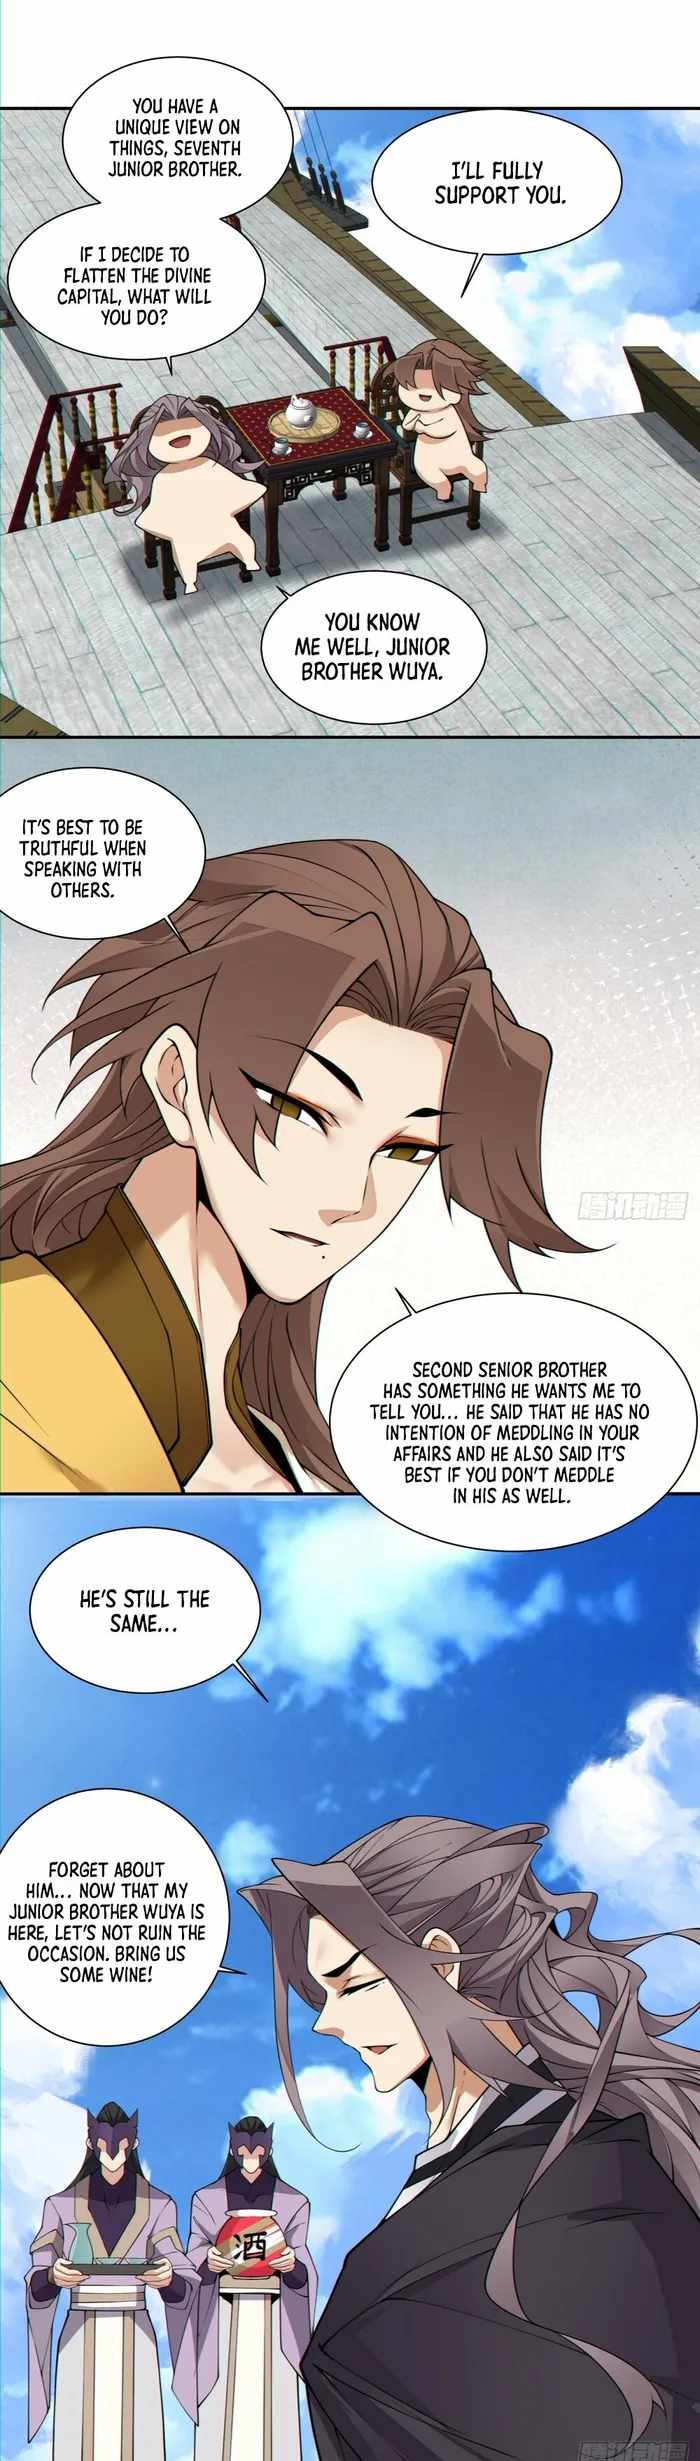 My Disciples Are All Big Villains Chapter 128-eng-li - Page 13